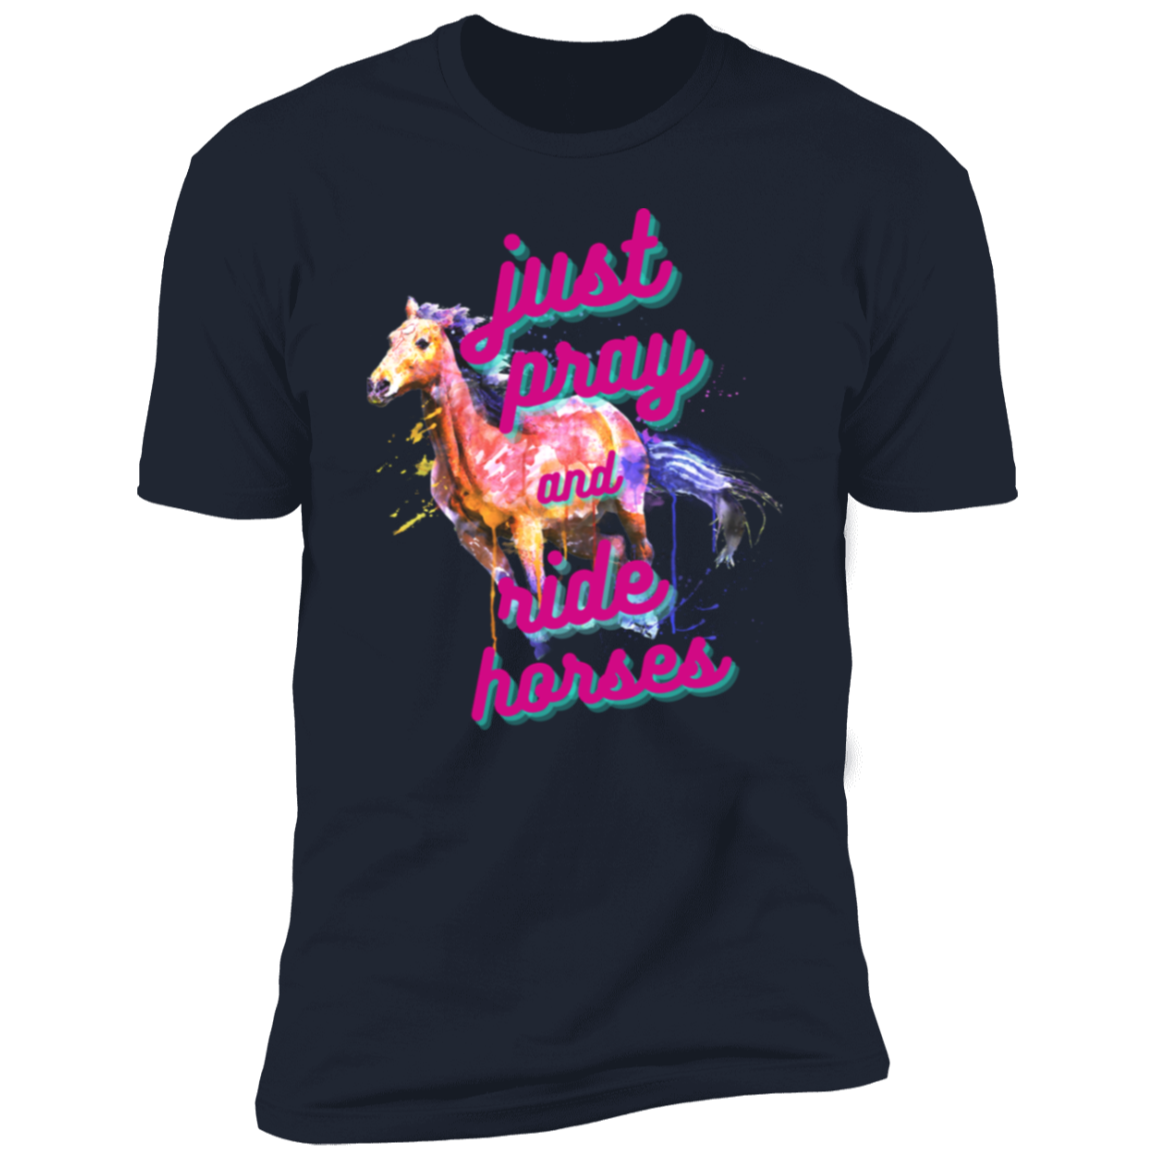 Just Pray and Ride Horses T-Shirt For Horse Lovers